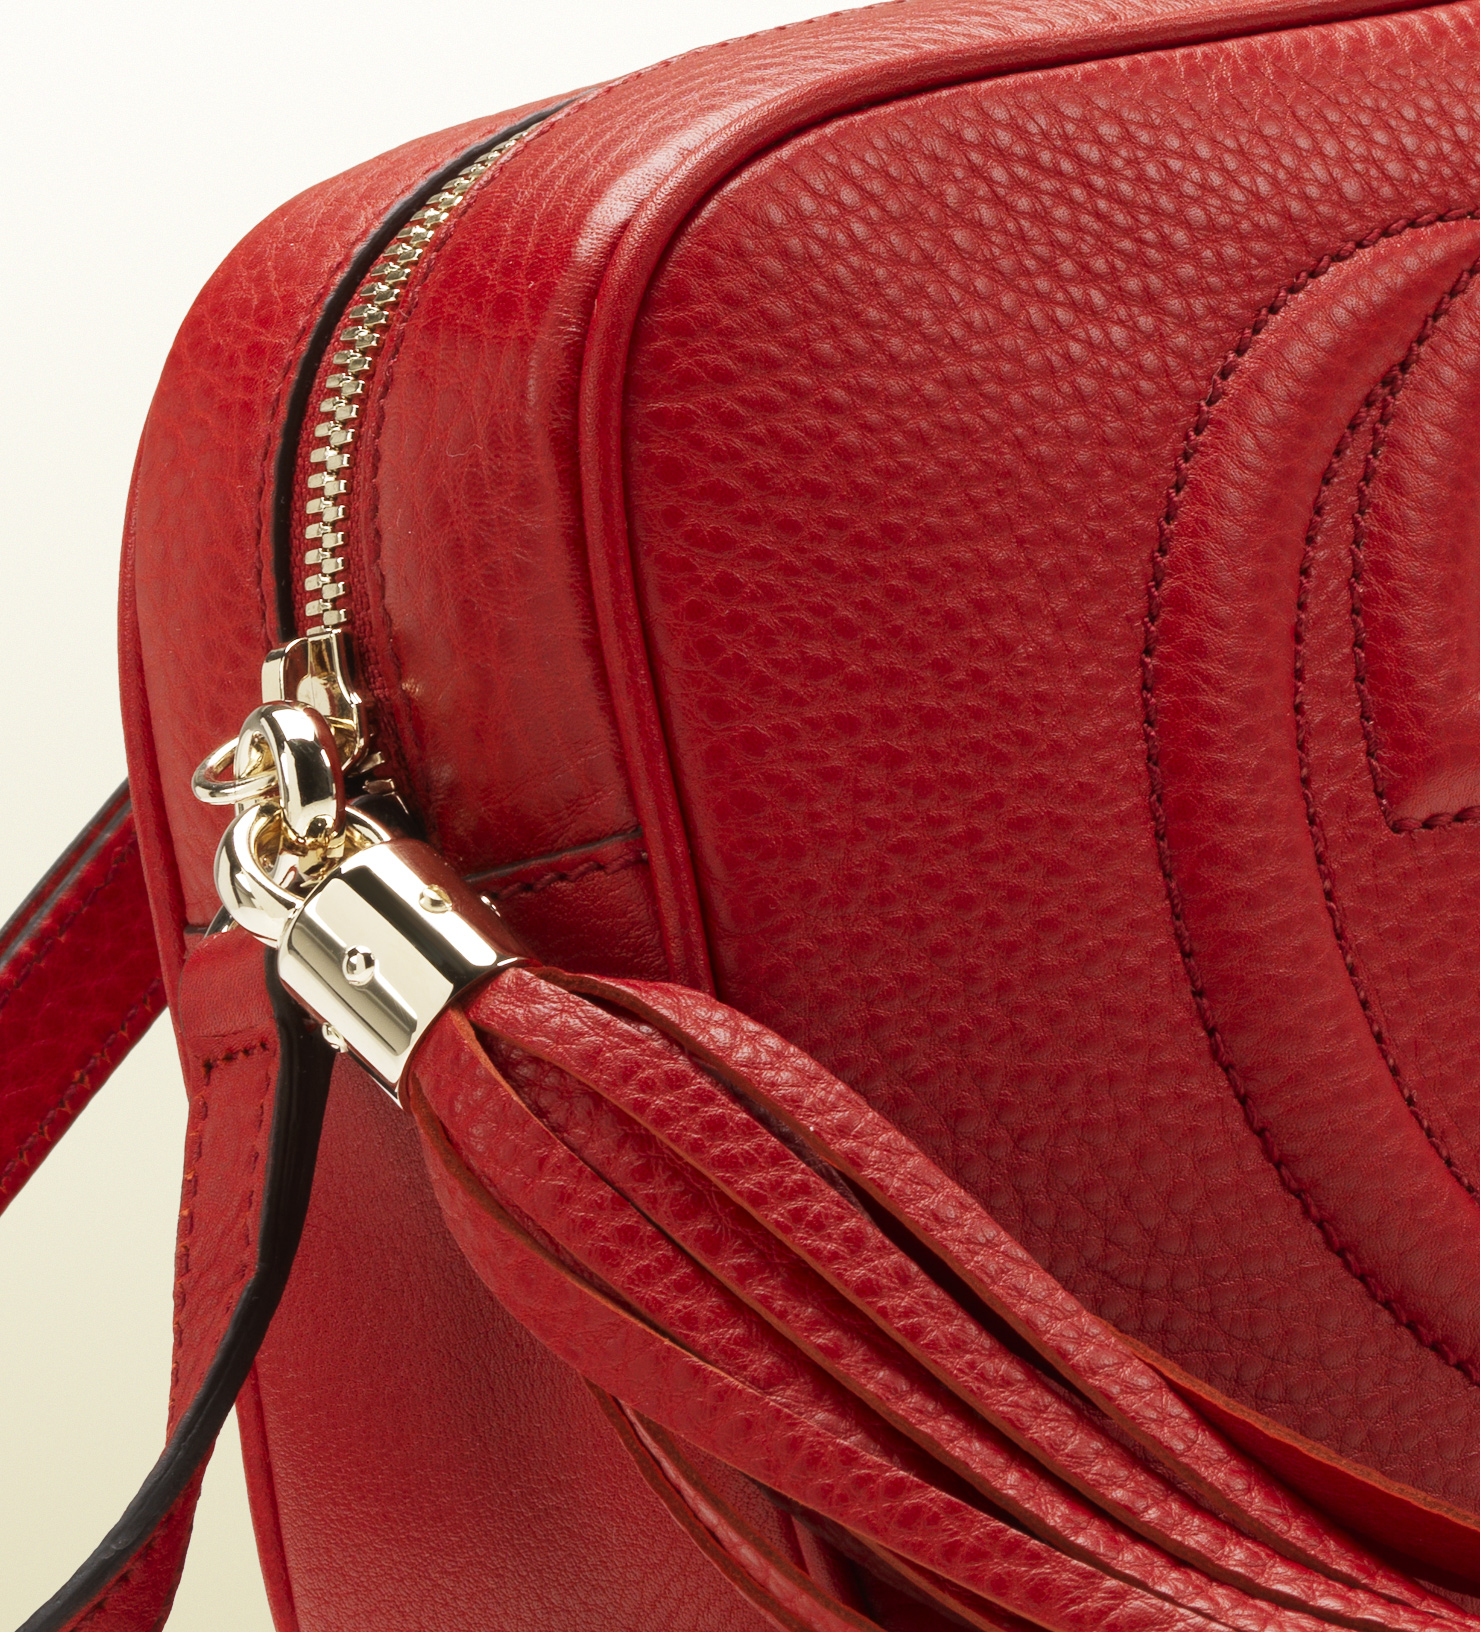 Gucci Soho Leather Disco Bag in Red - Lyst